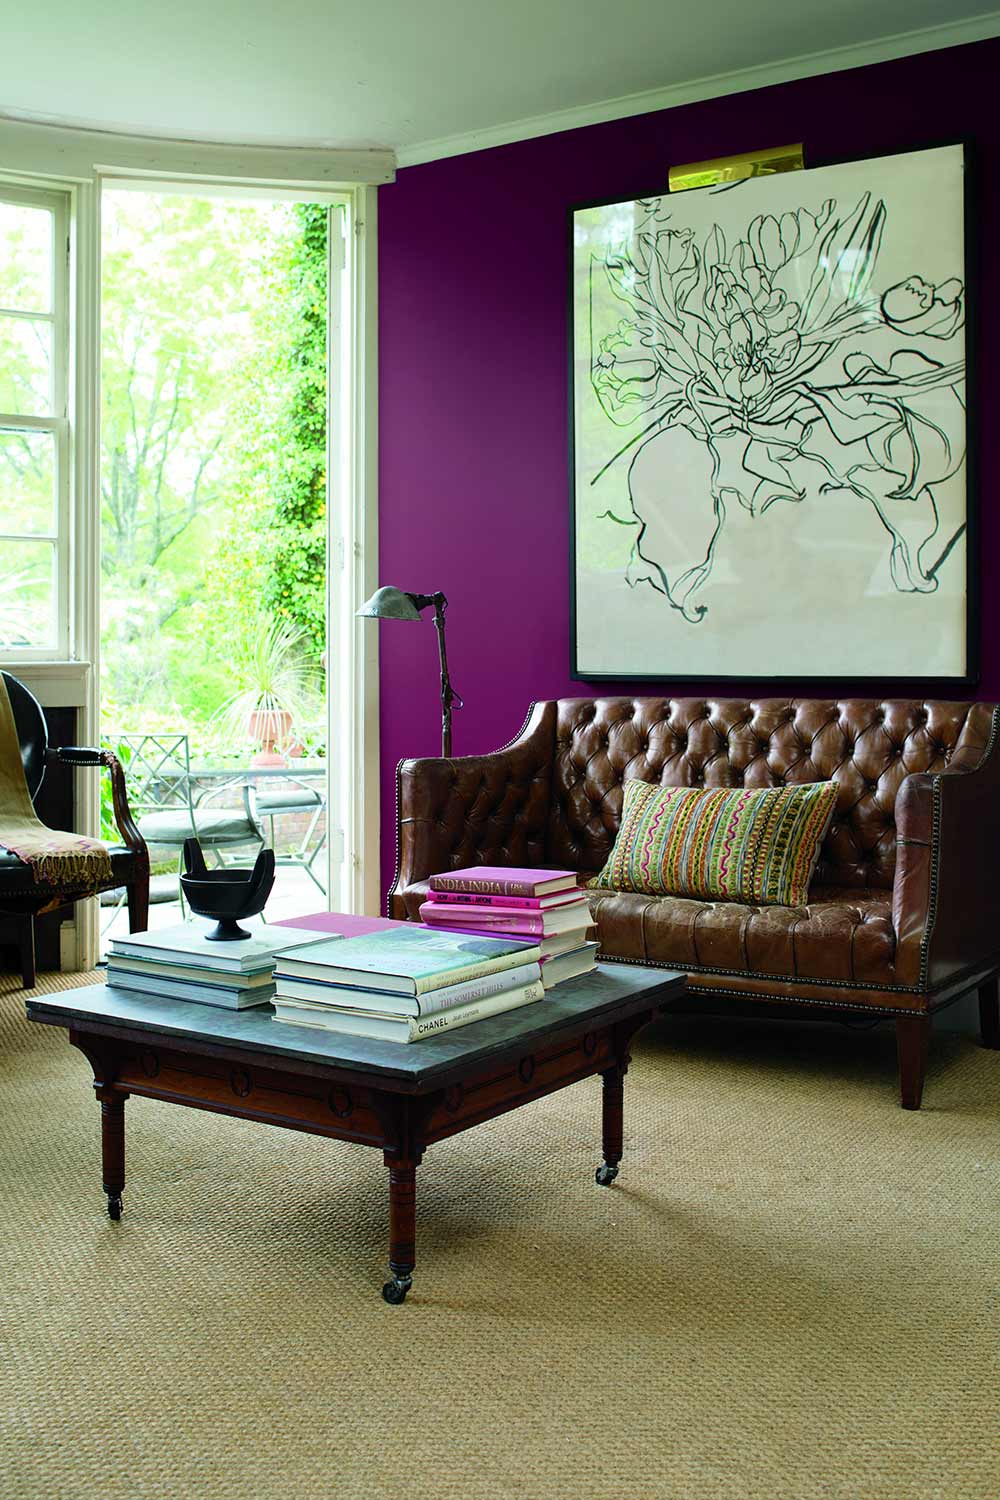 living room with a large window and bright purple wall